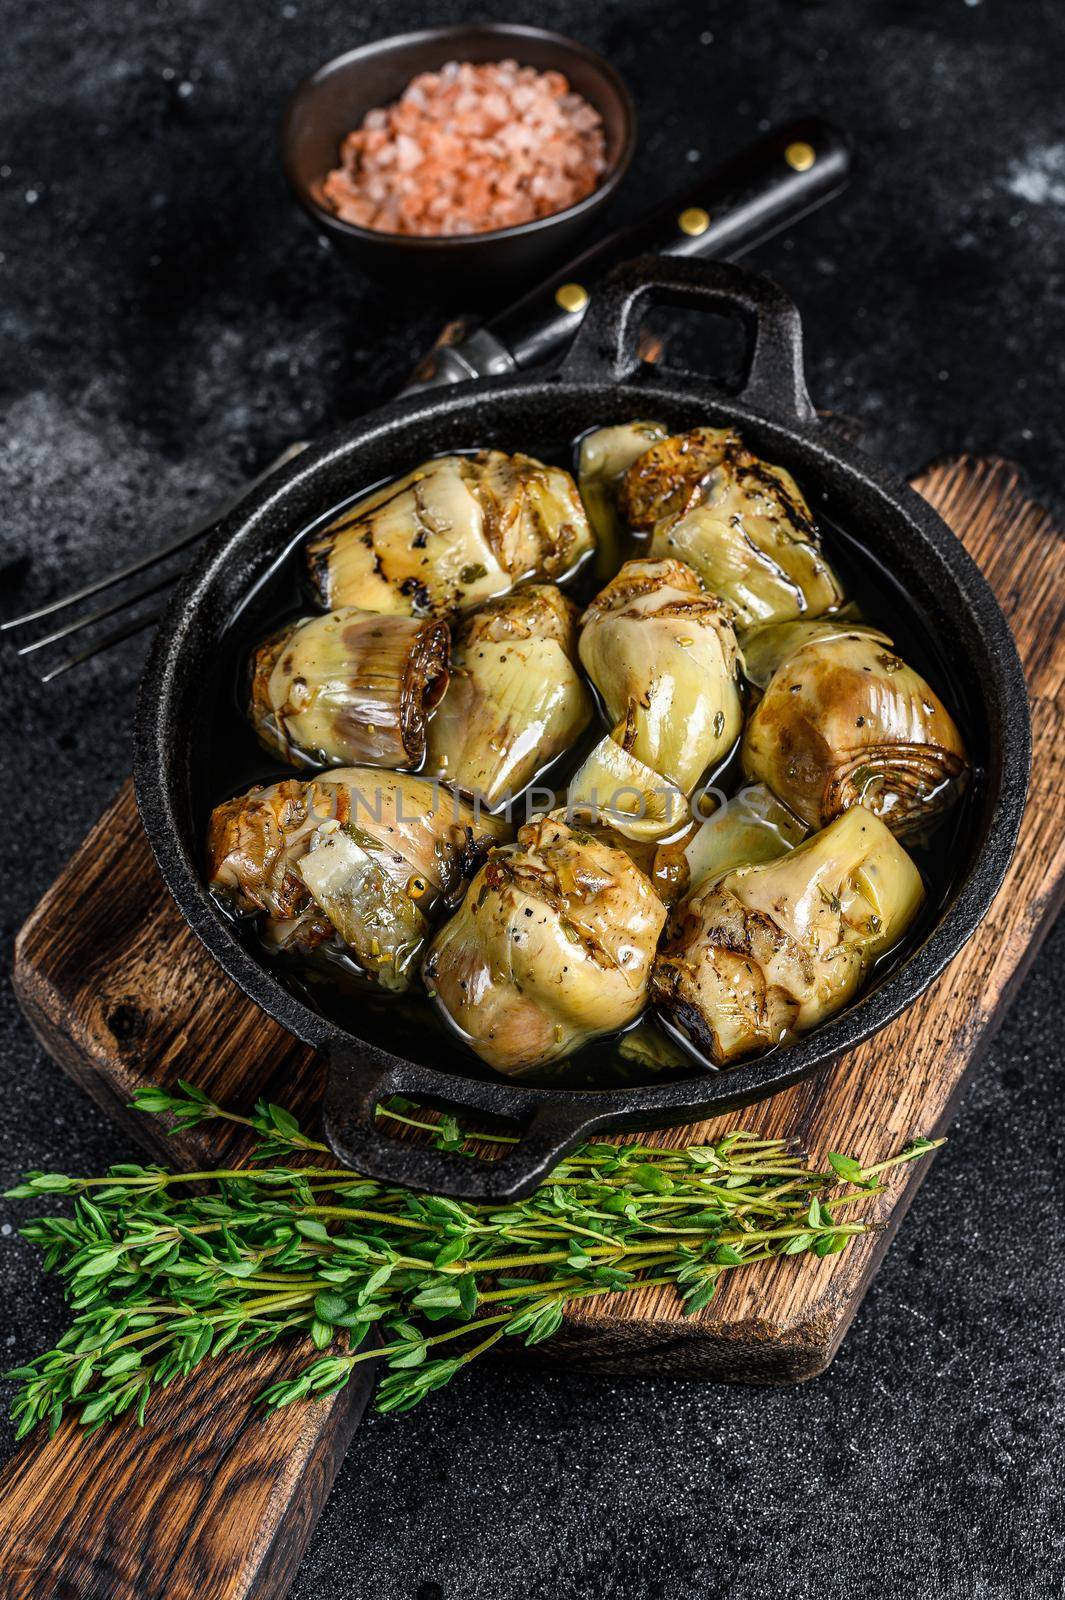 Canned artichokes in olive oil on a rustic wooden kitchen table. Black background. Top view.